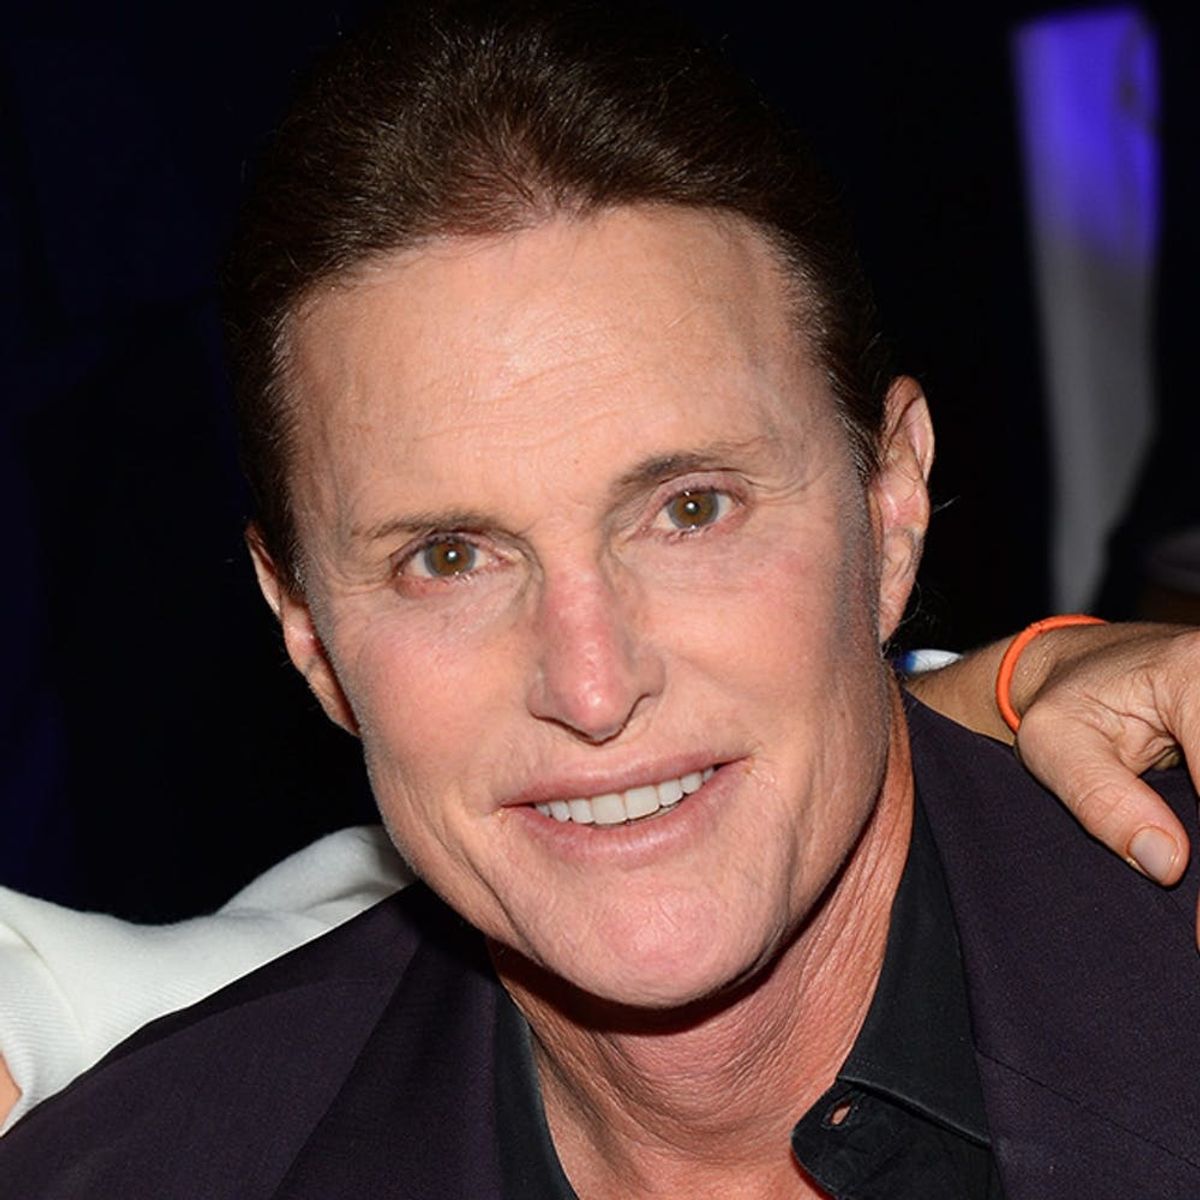 People Around the World Are Doing THIS to Support Bruce Jenner